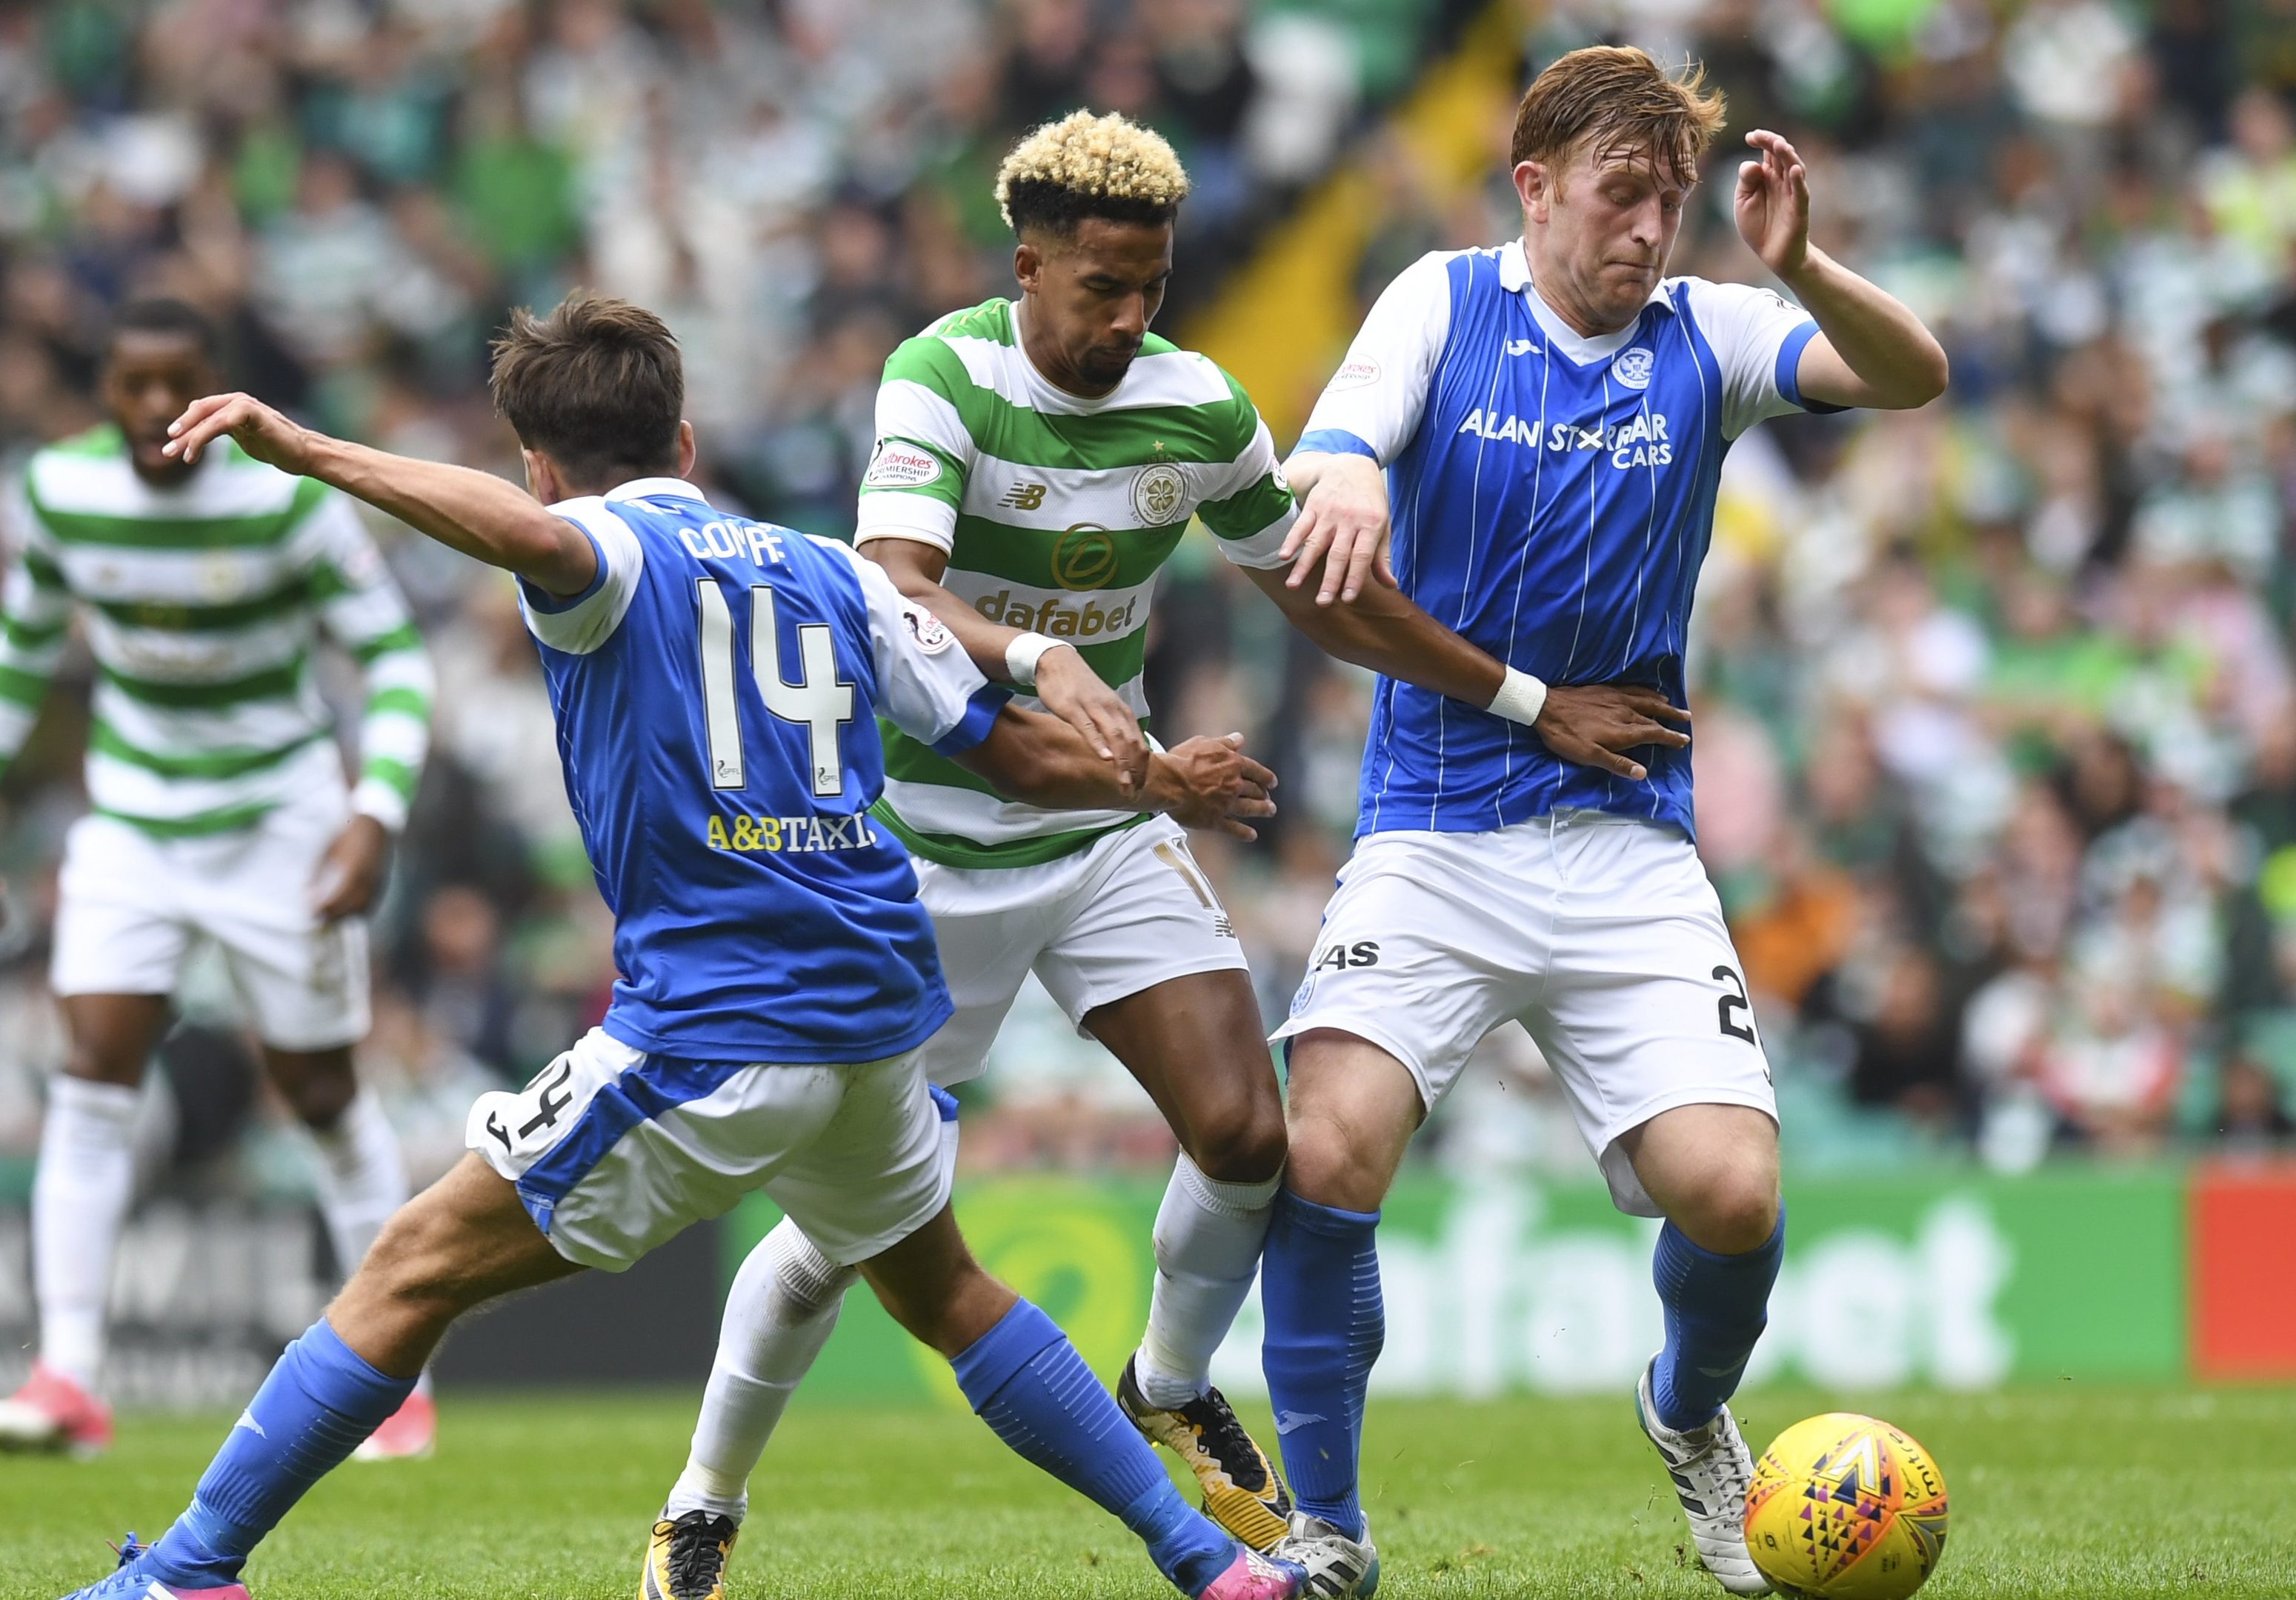 Celtic's Scott Sinclair is tackled by Aaron Comrie (left) and Liam Craig